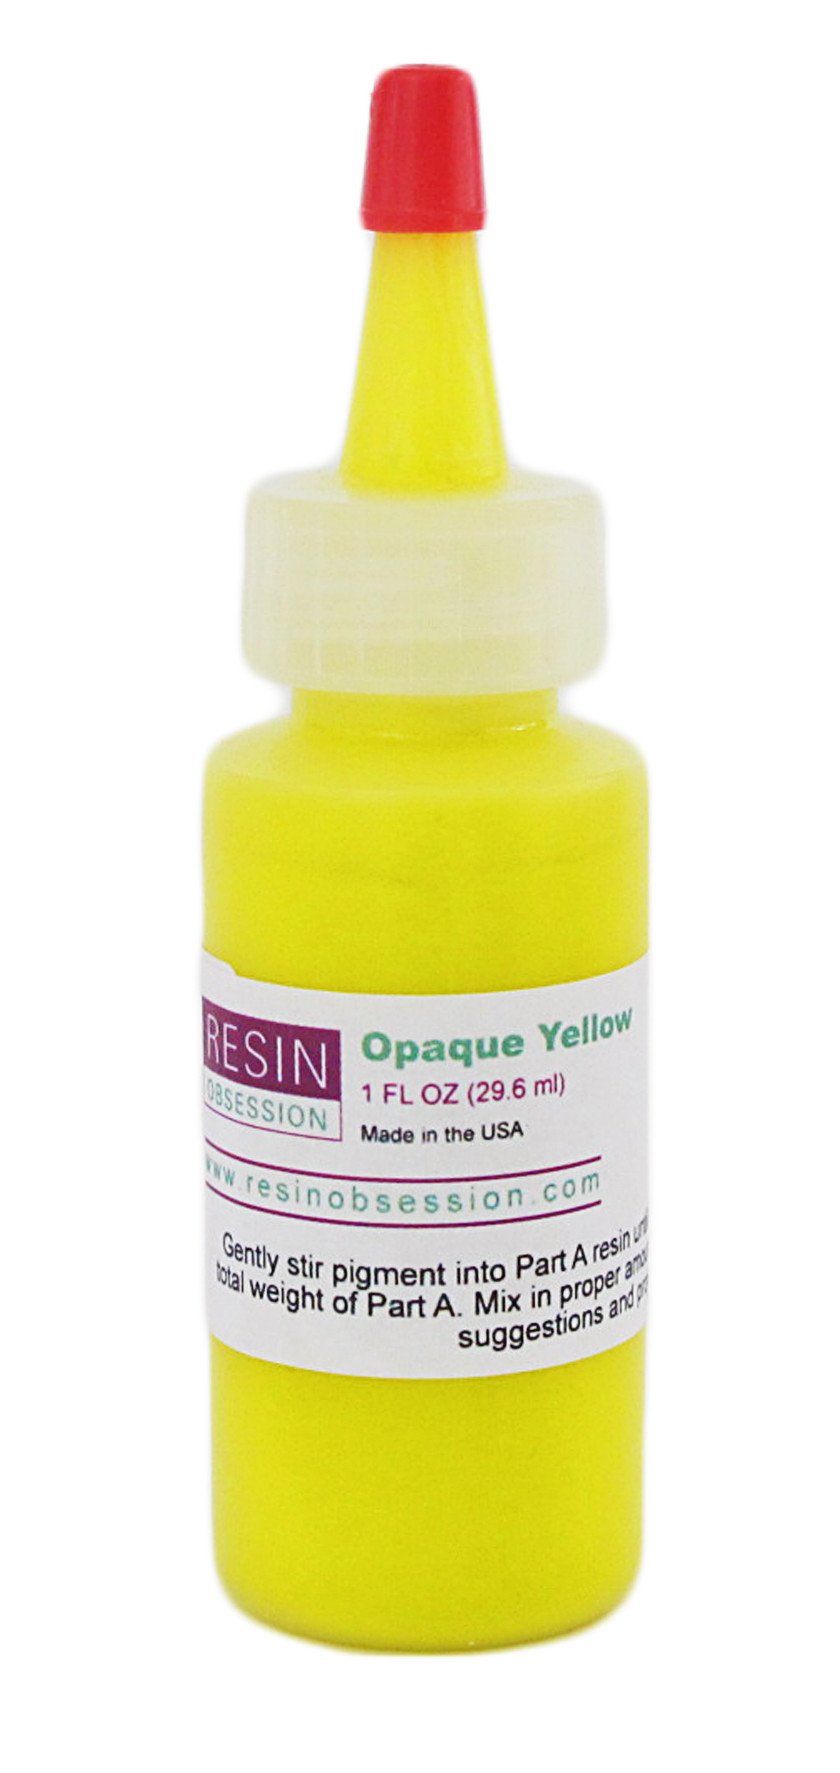 Epoxy Resin Pigment - 24 Colors Liquid Translucent Epoxy Resin Colorant,  Highly Concentrated Dye for DIY Jewelry Making, Paint, Craft - 6ml Each,  with